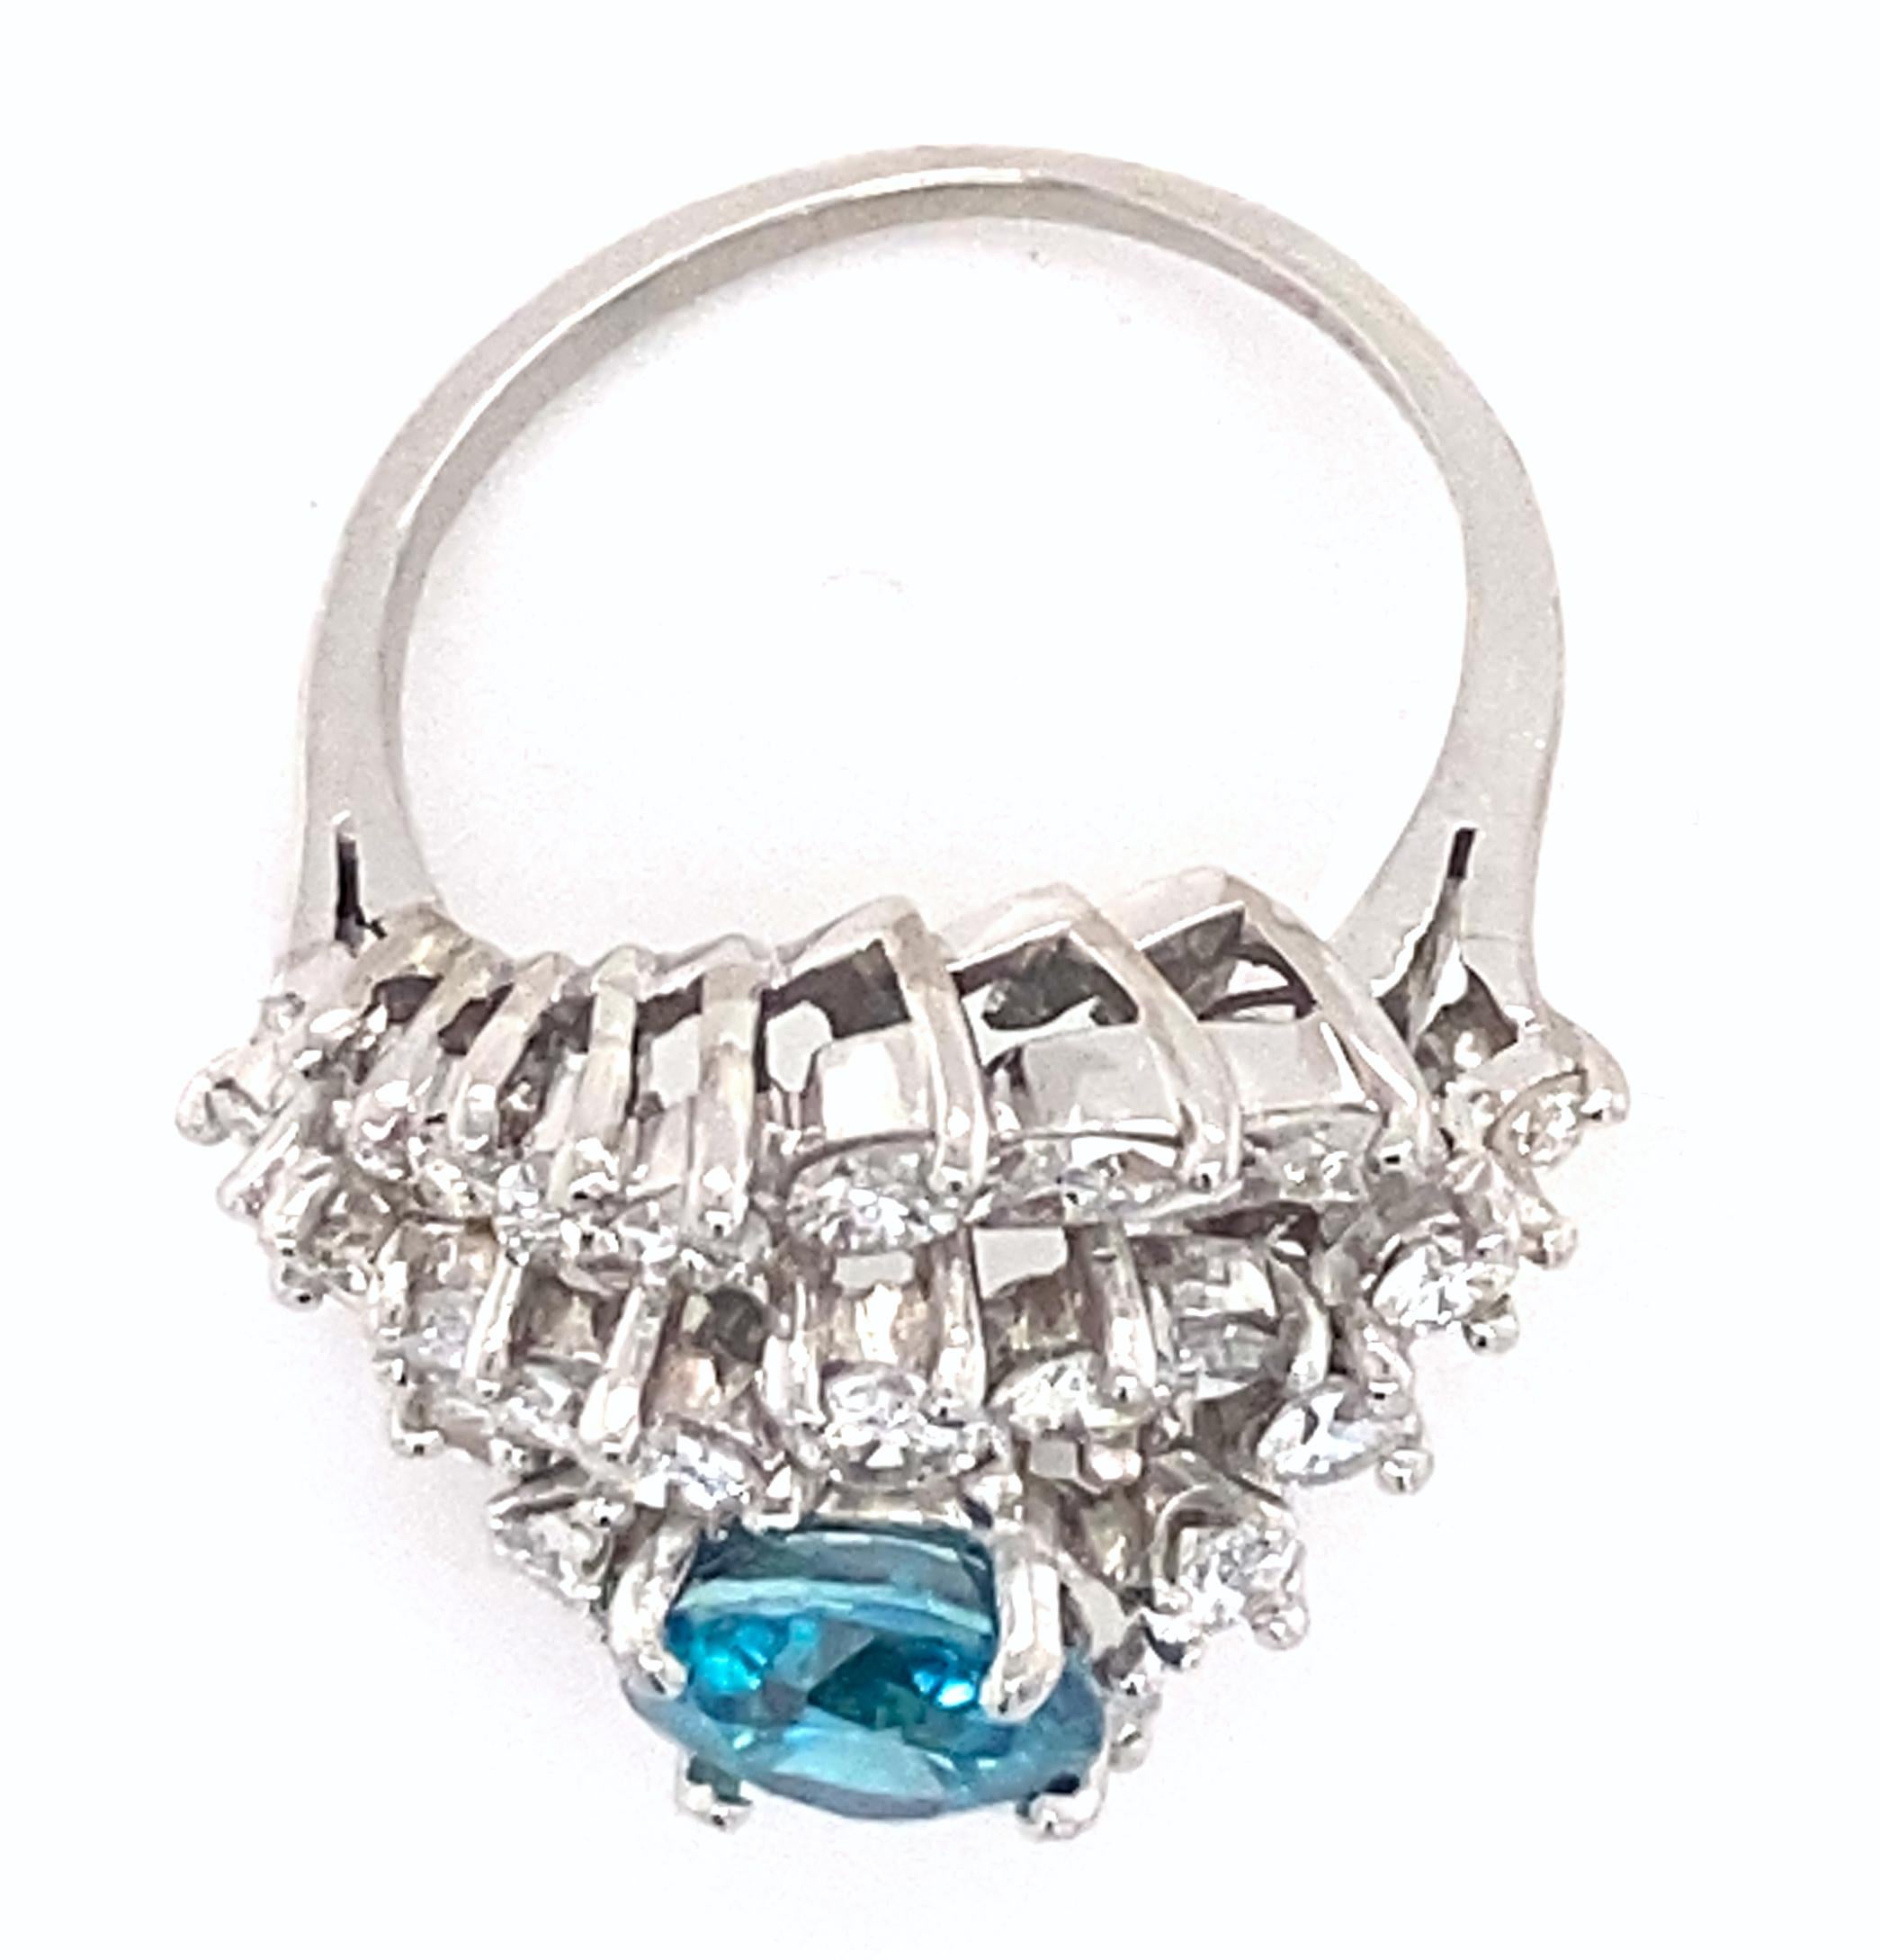 Marquise Cut 2.4 Carat Diamond Whirlpool Platinum Cocktail Ring with Blue Zircon, circa 1960 For Sale